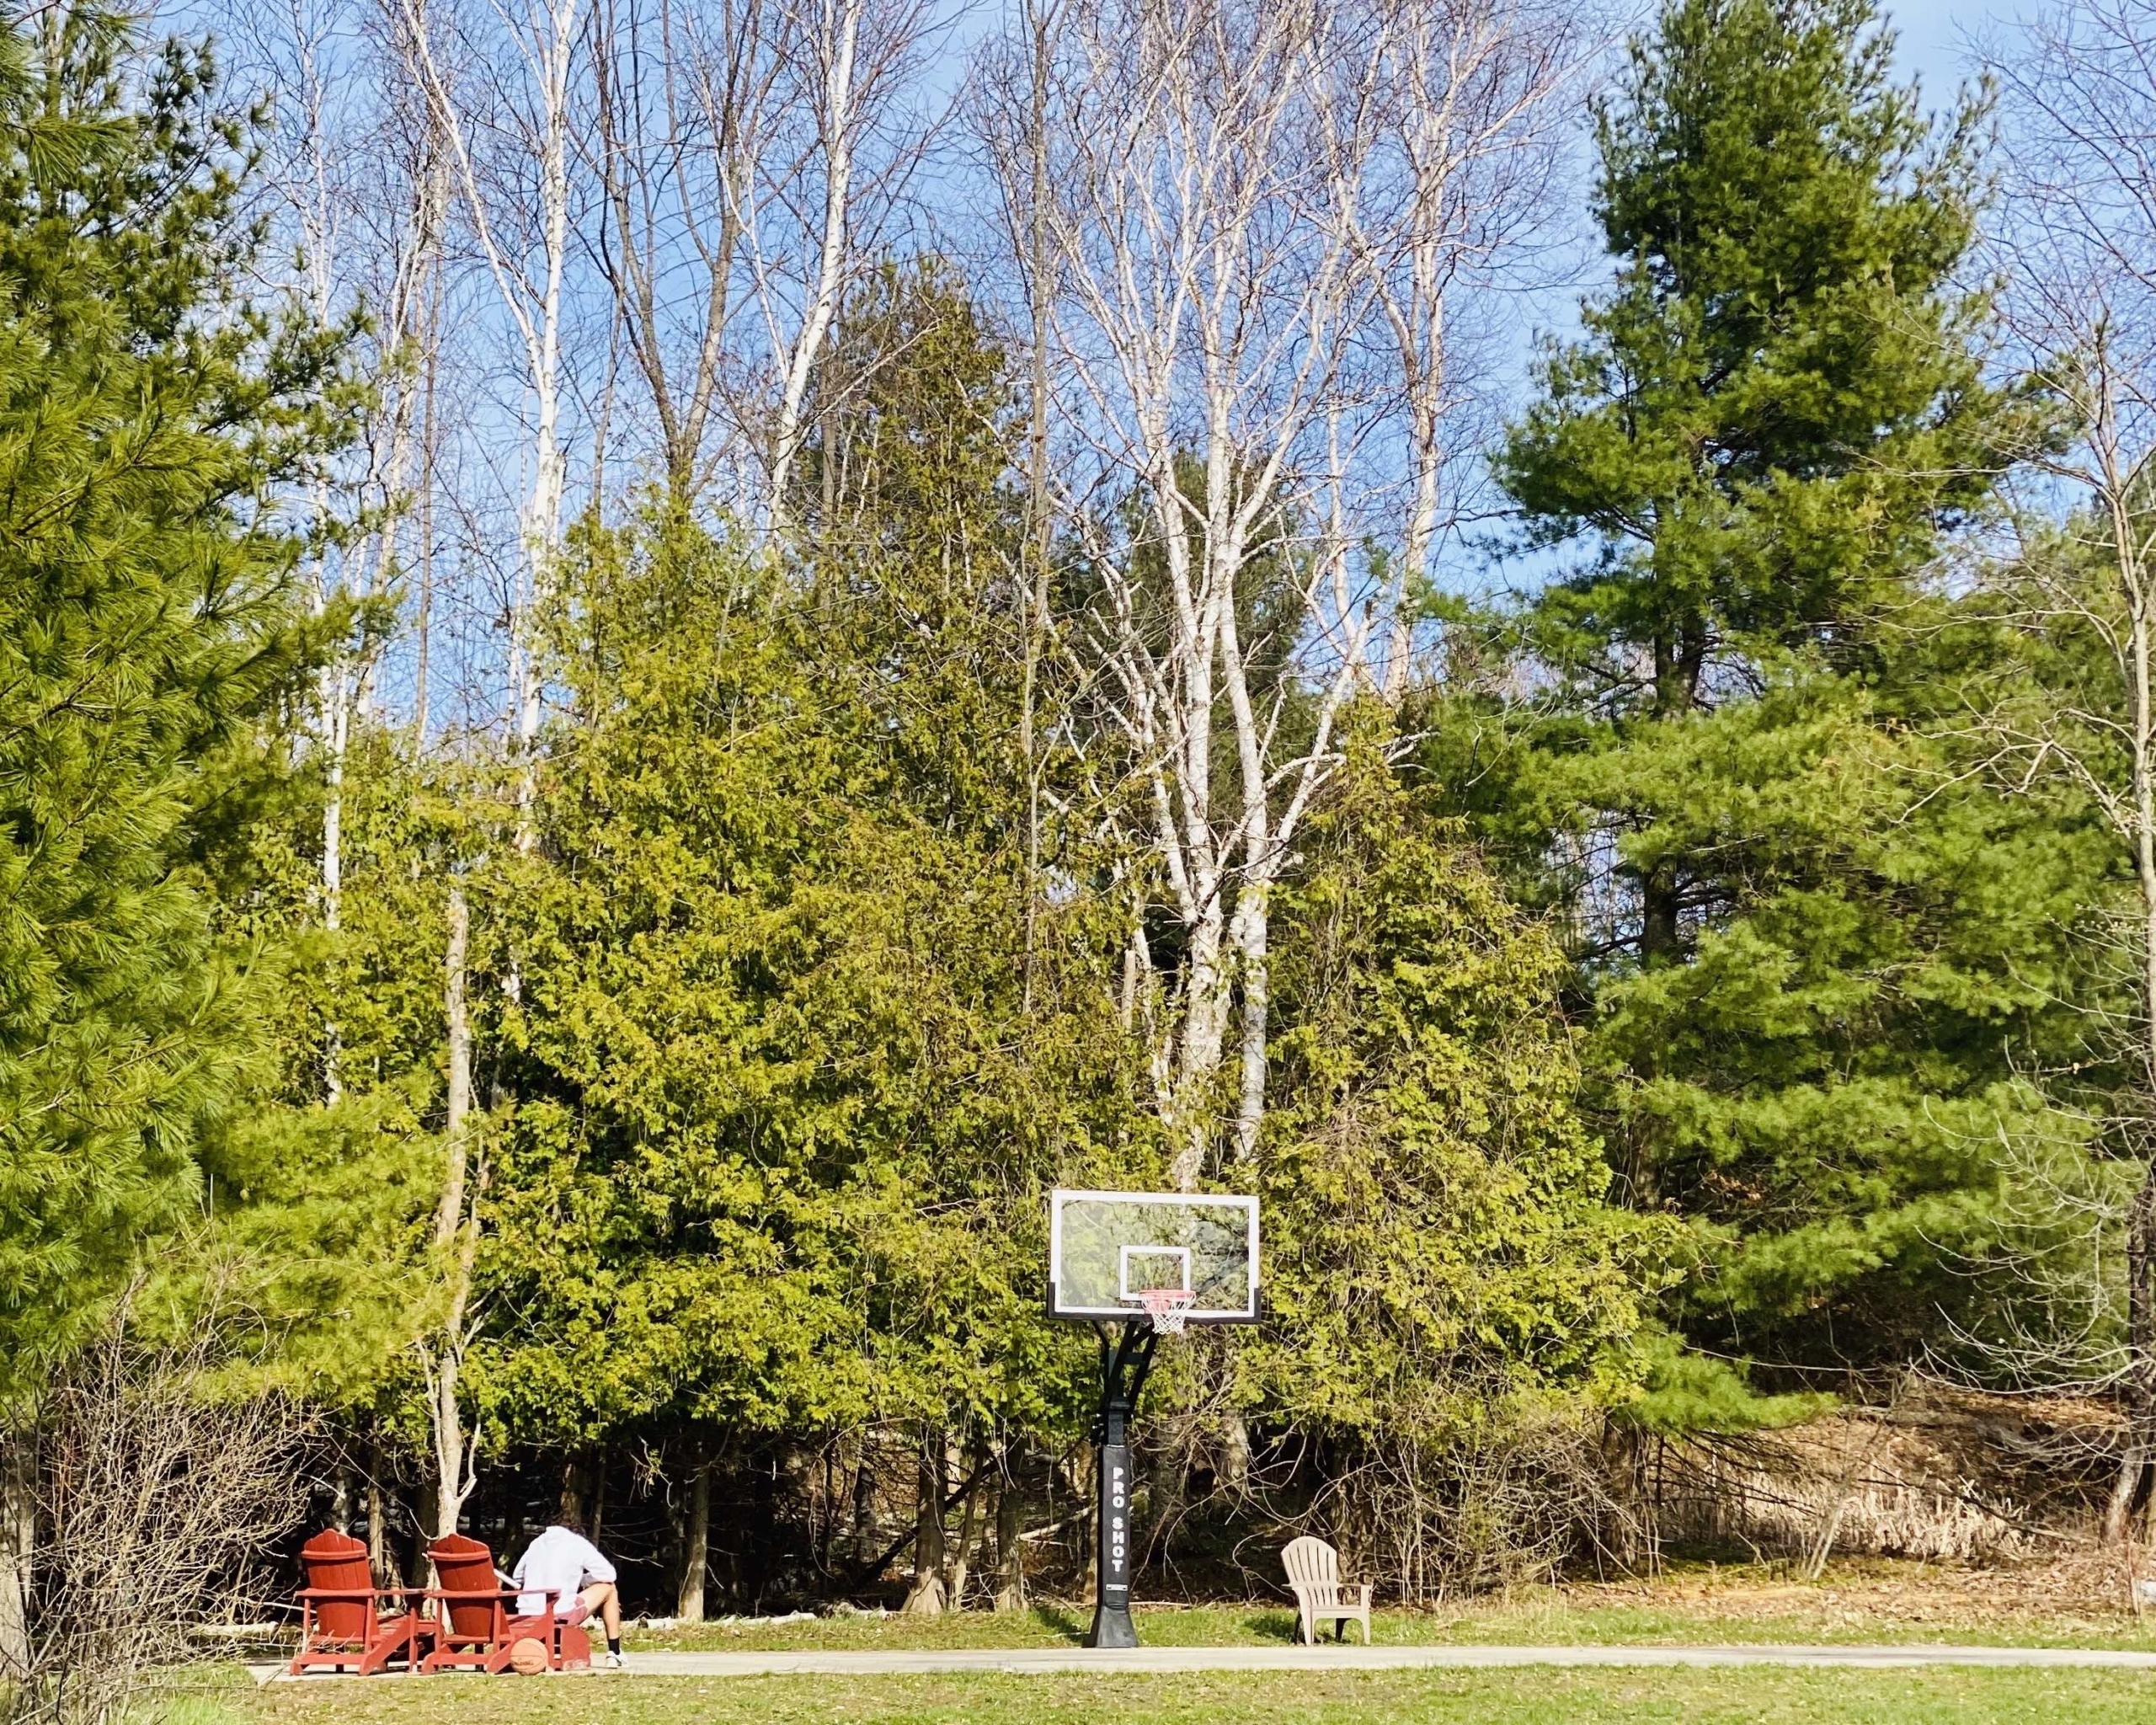 Basketball hoop surrounded by large trees